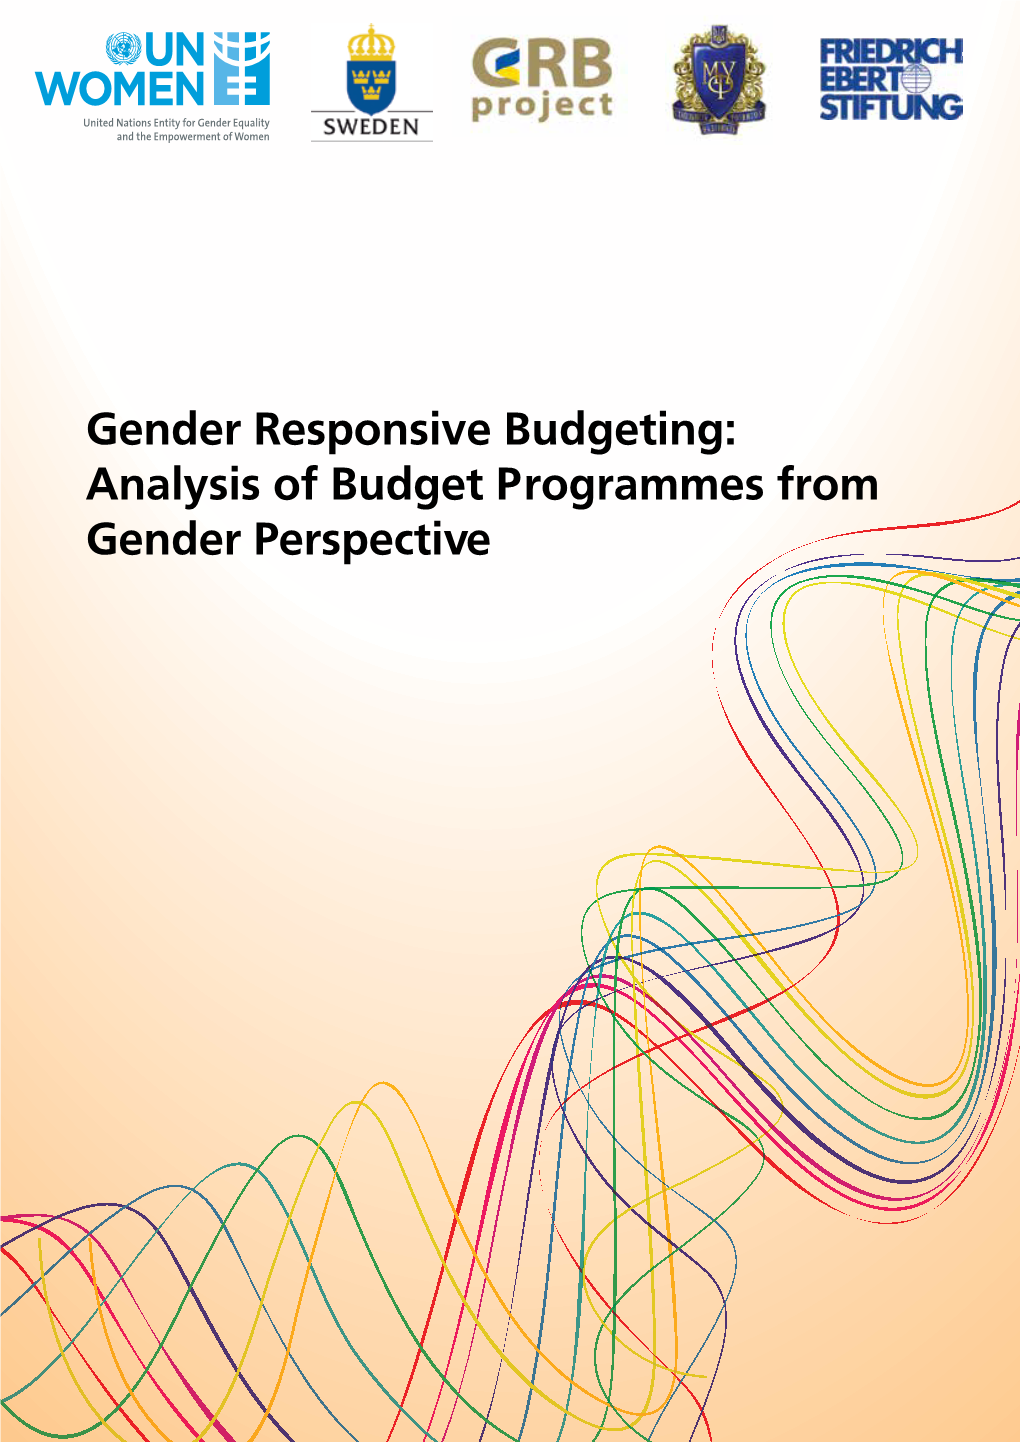 Analysis of Budget Programmes from Gender Perspective